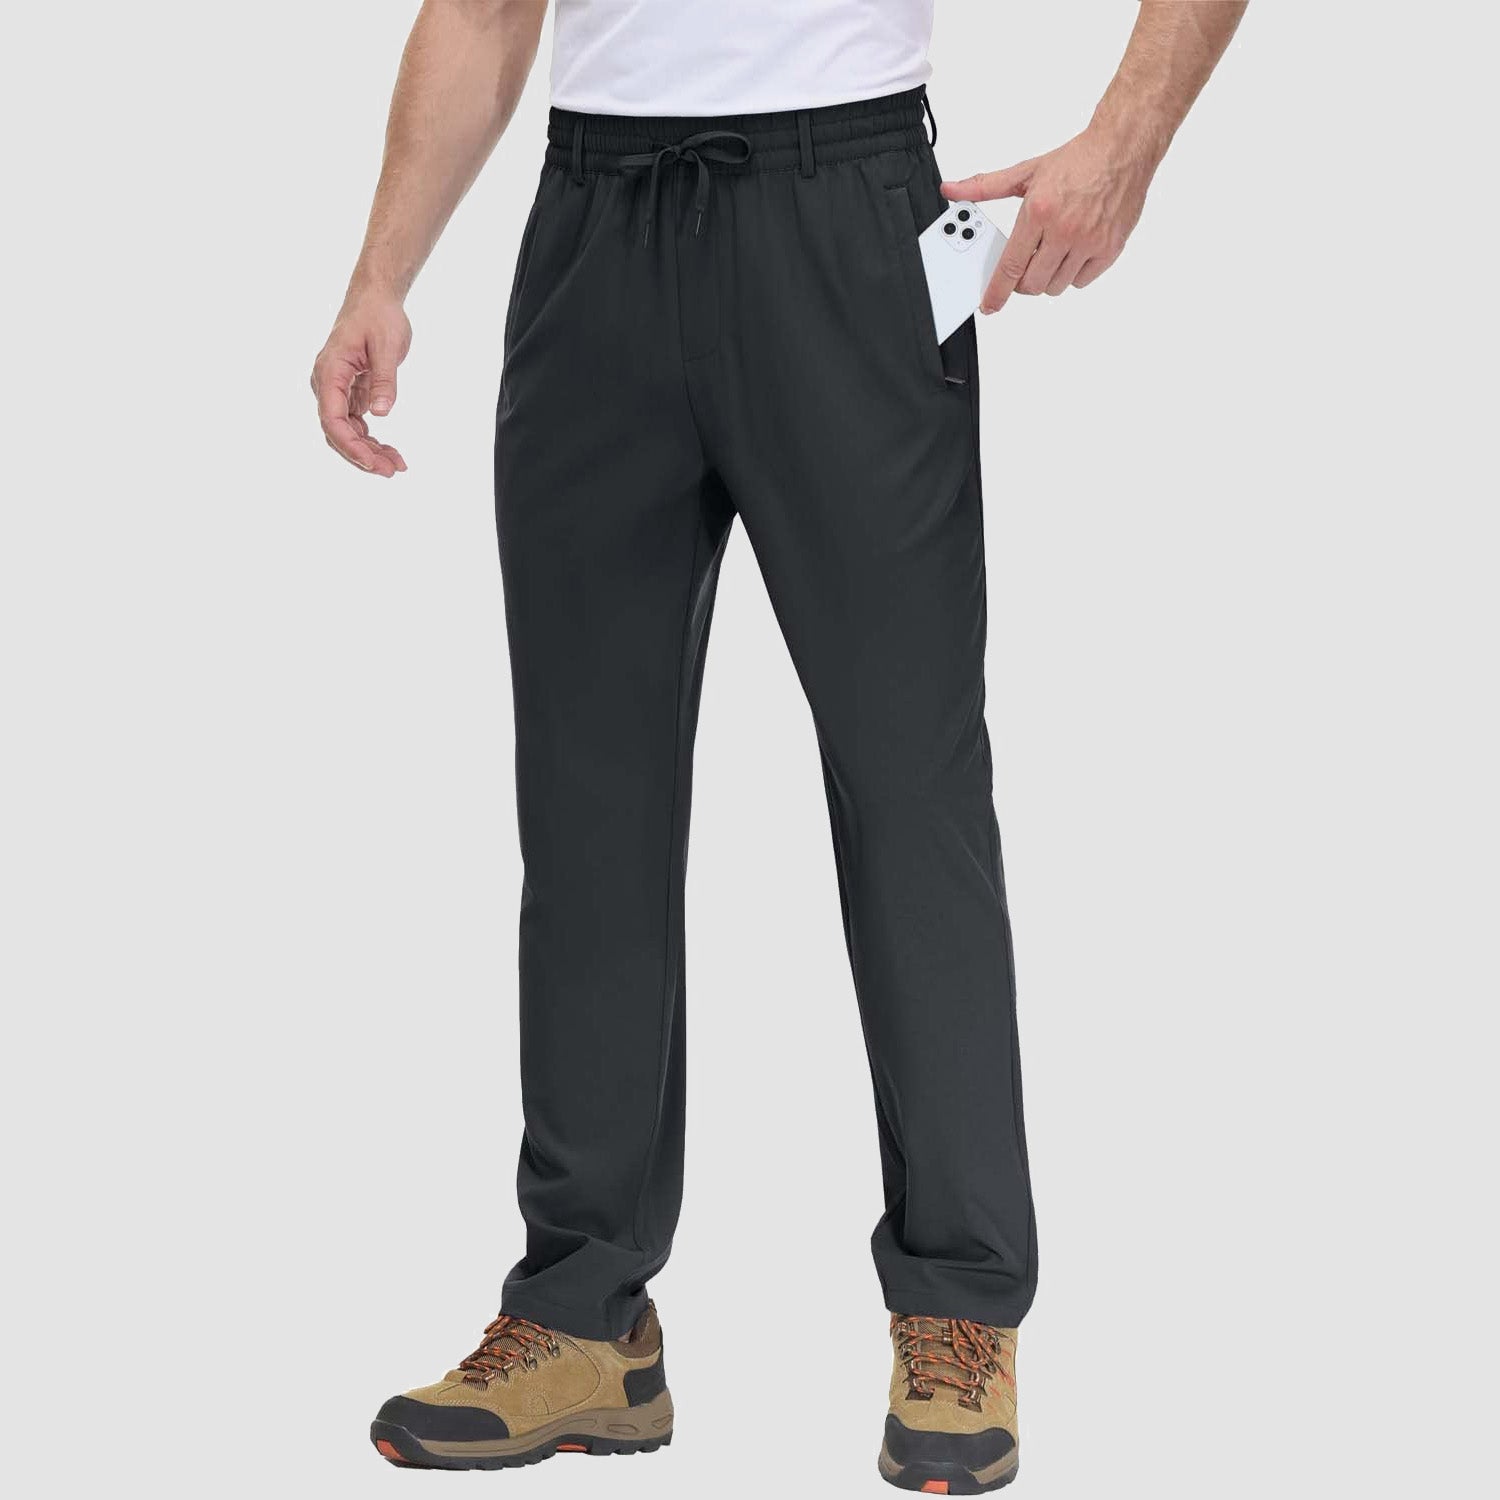 Men's Quick Dry Athletic Pants Straight Leg Stretch Hiking Pants with Zipper Pockets